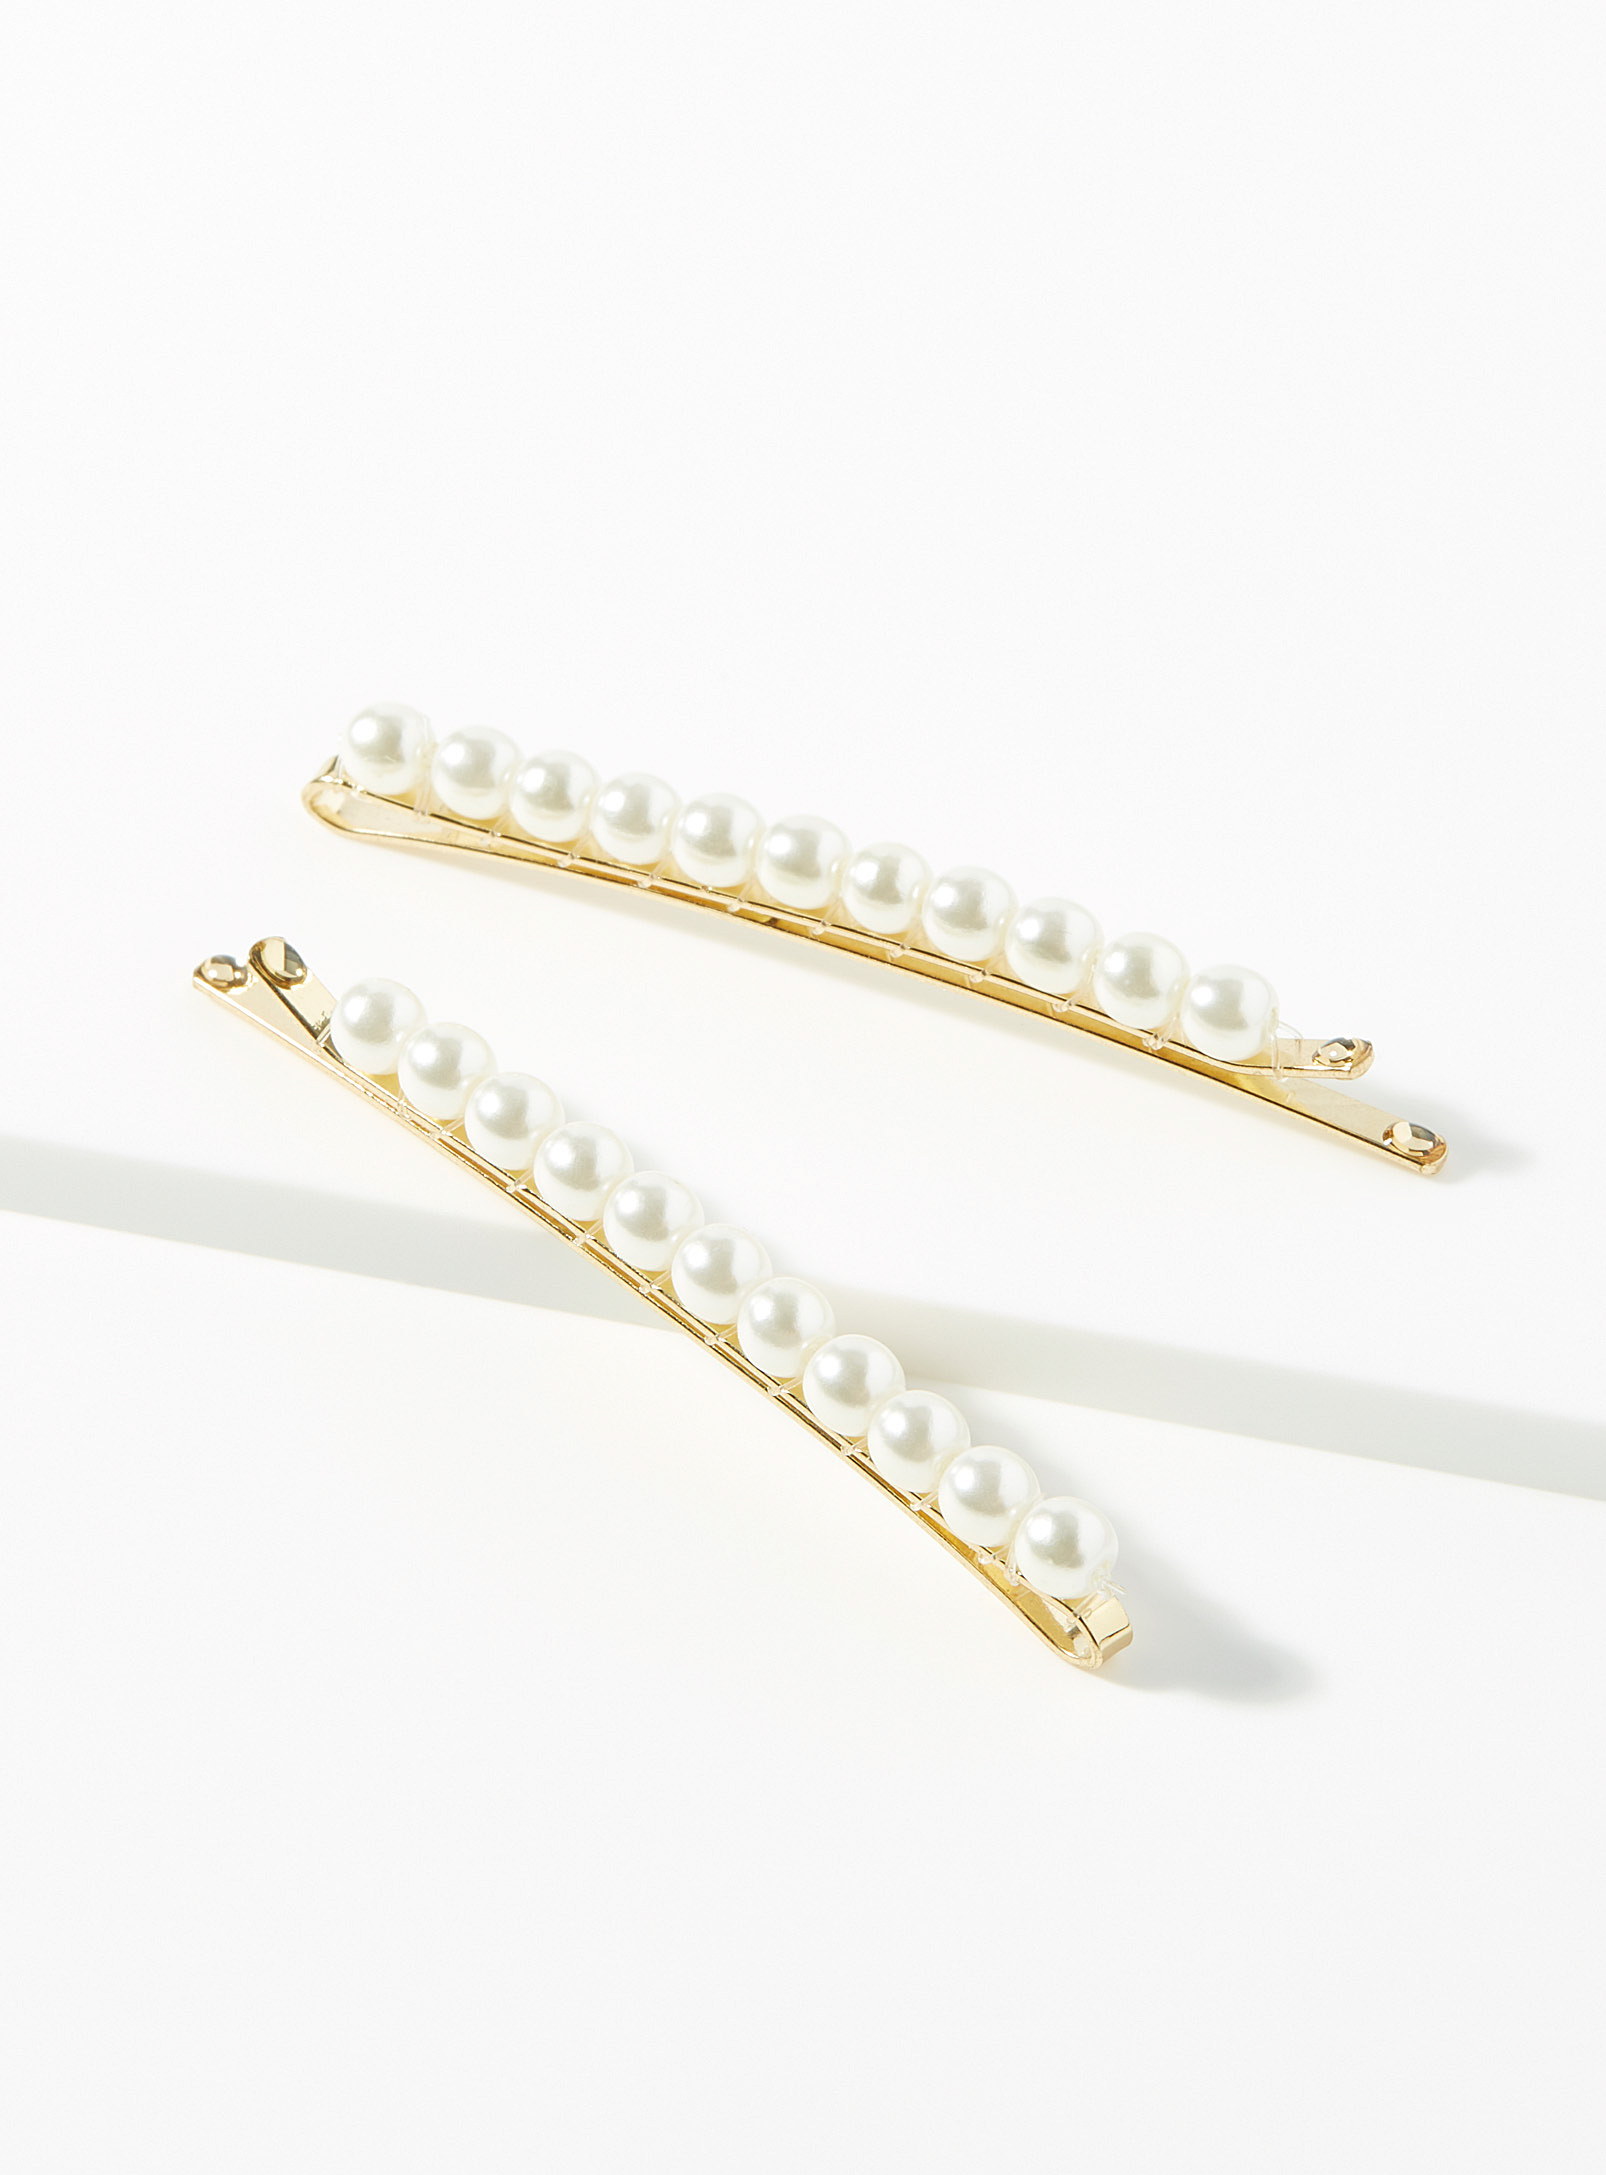 Simons - Women's Pearly bead barrettes Set of 2